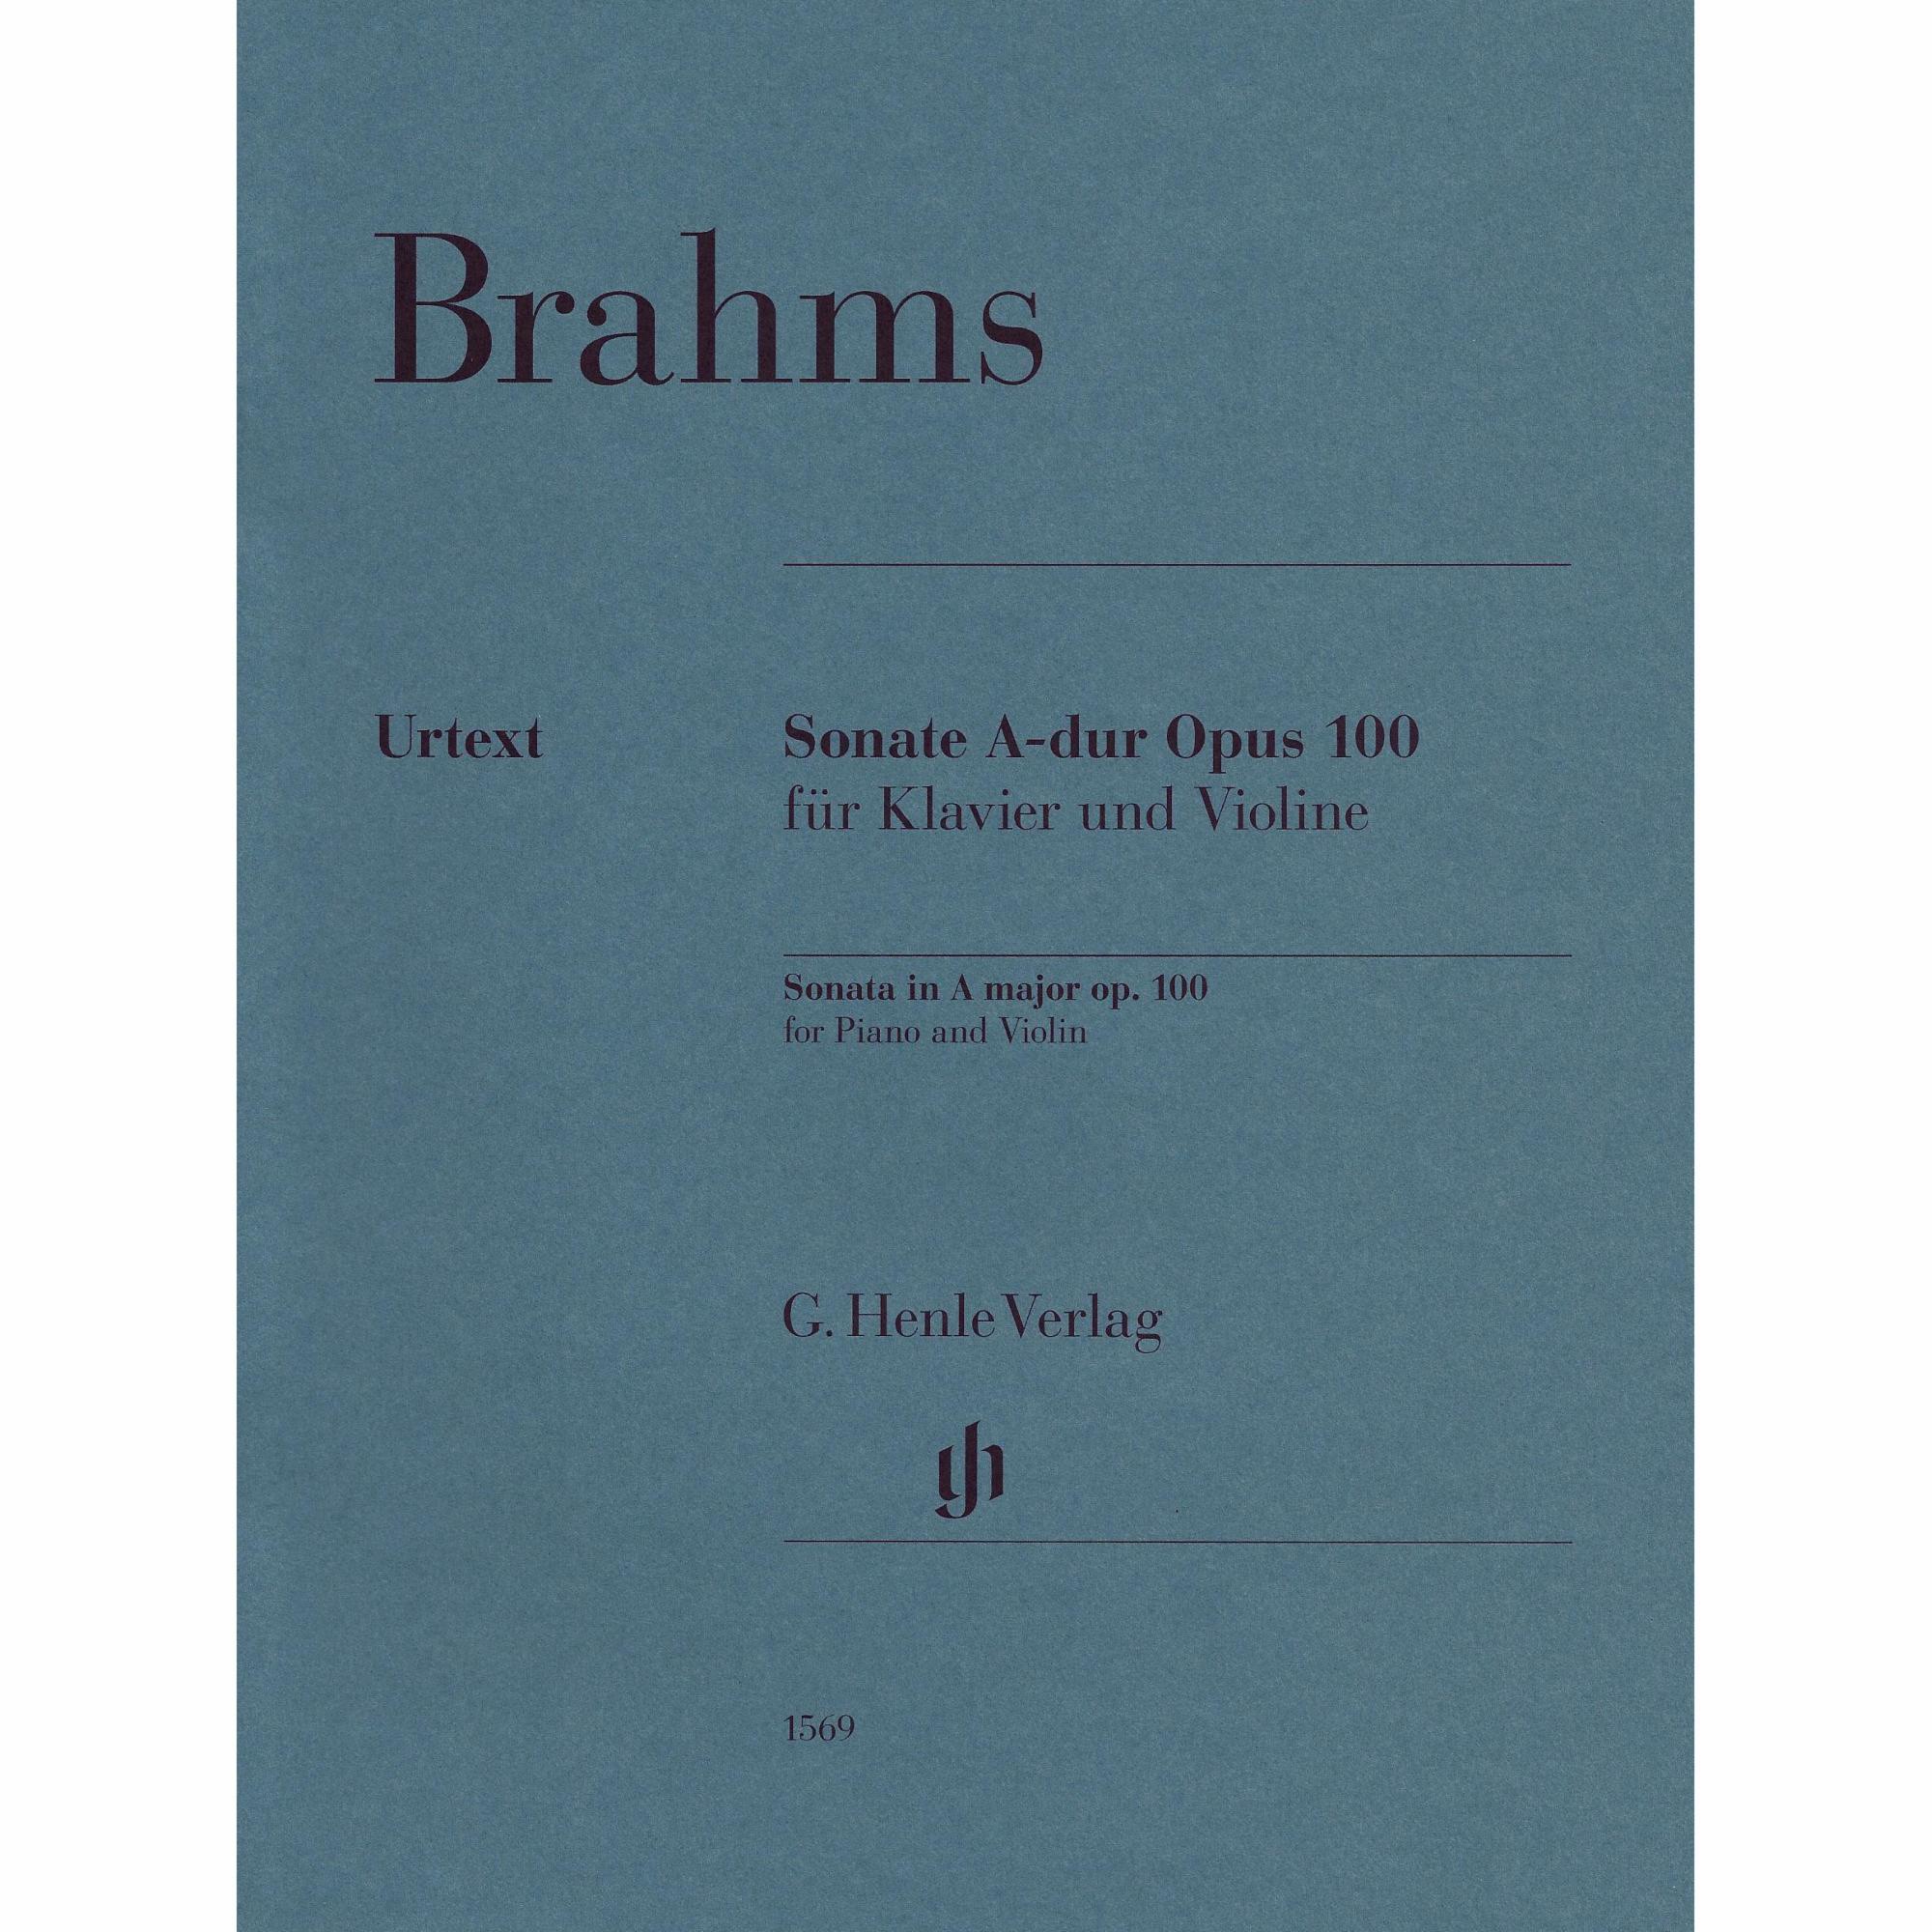 Brahms -- Sonata in A Major, Op. 100 for Violin and Piano